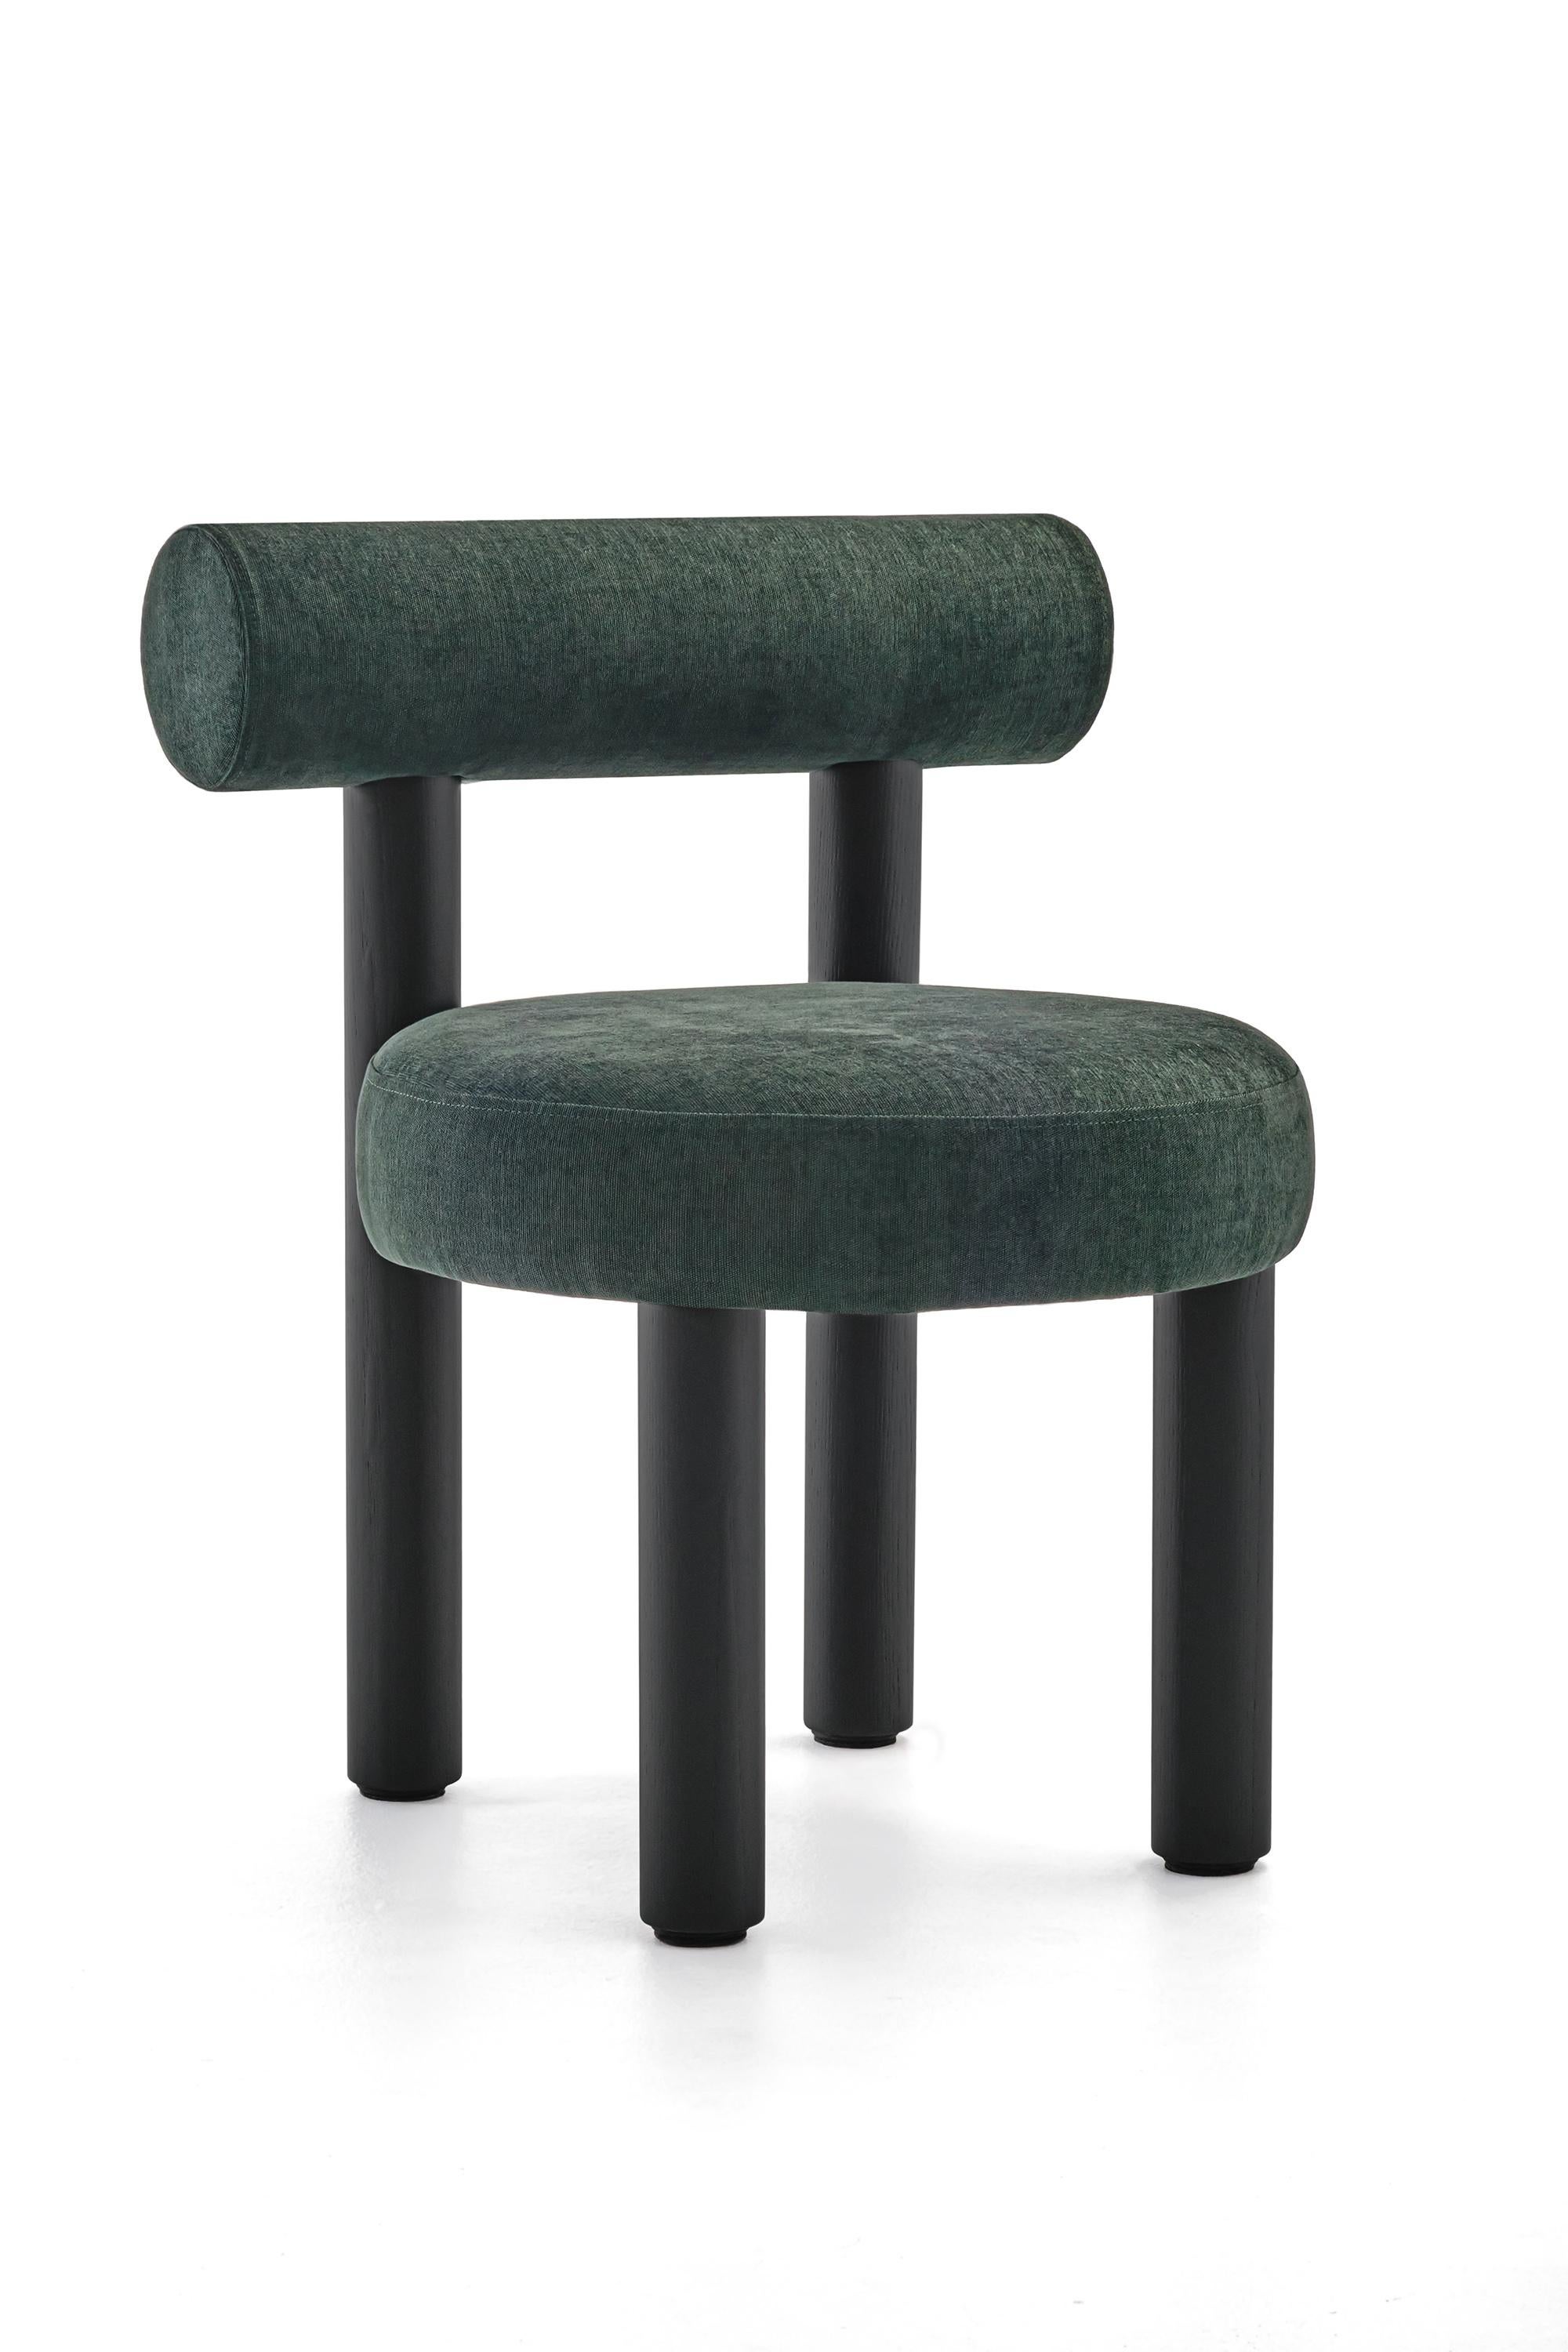 Modern Dining Chair Gropius CS2 in Wool Fabric with Wooden Legs by Noom 10